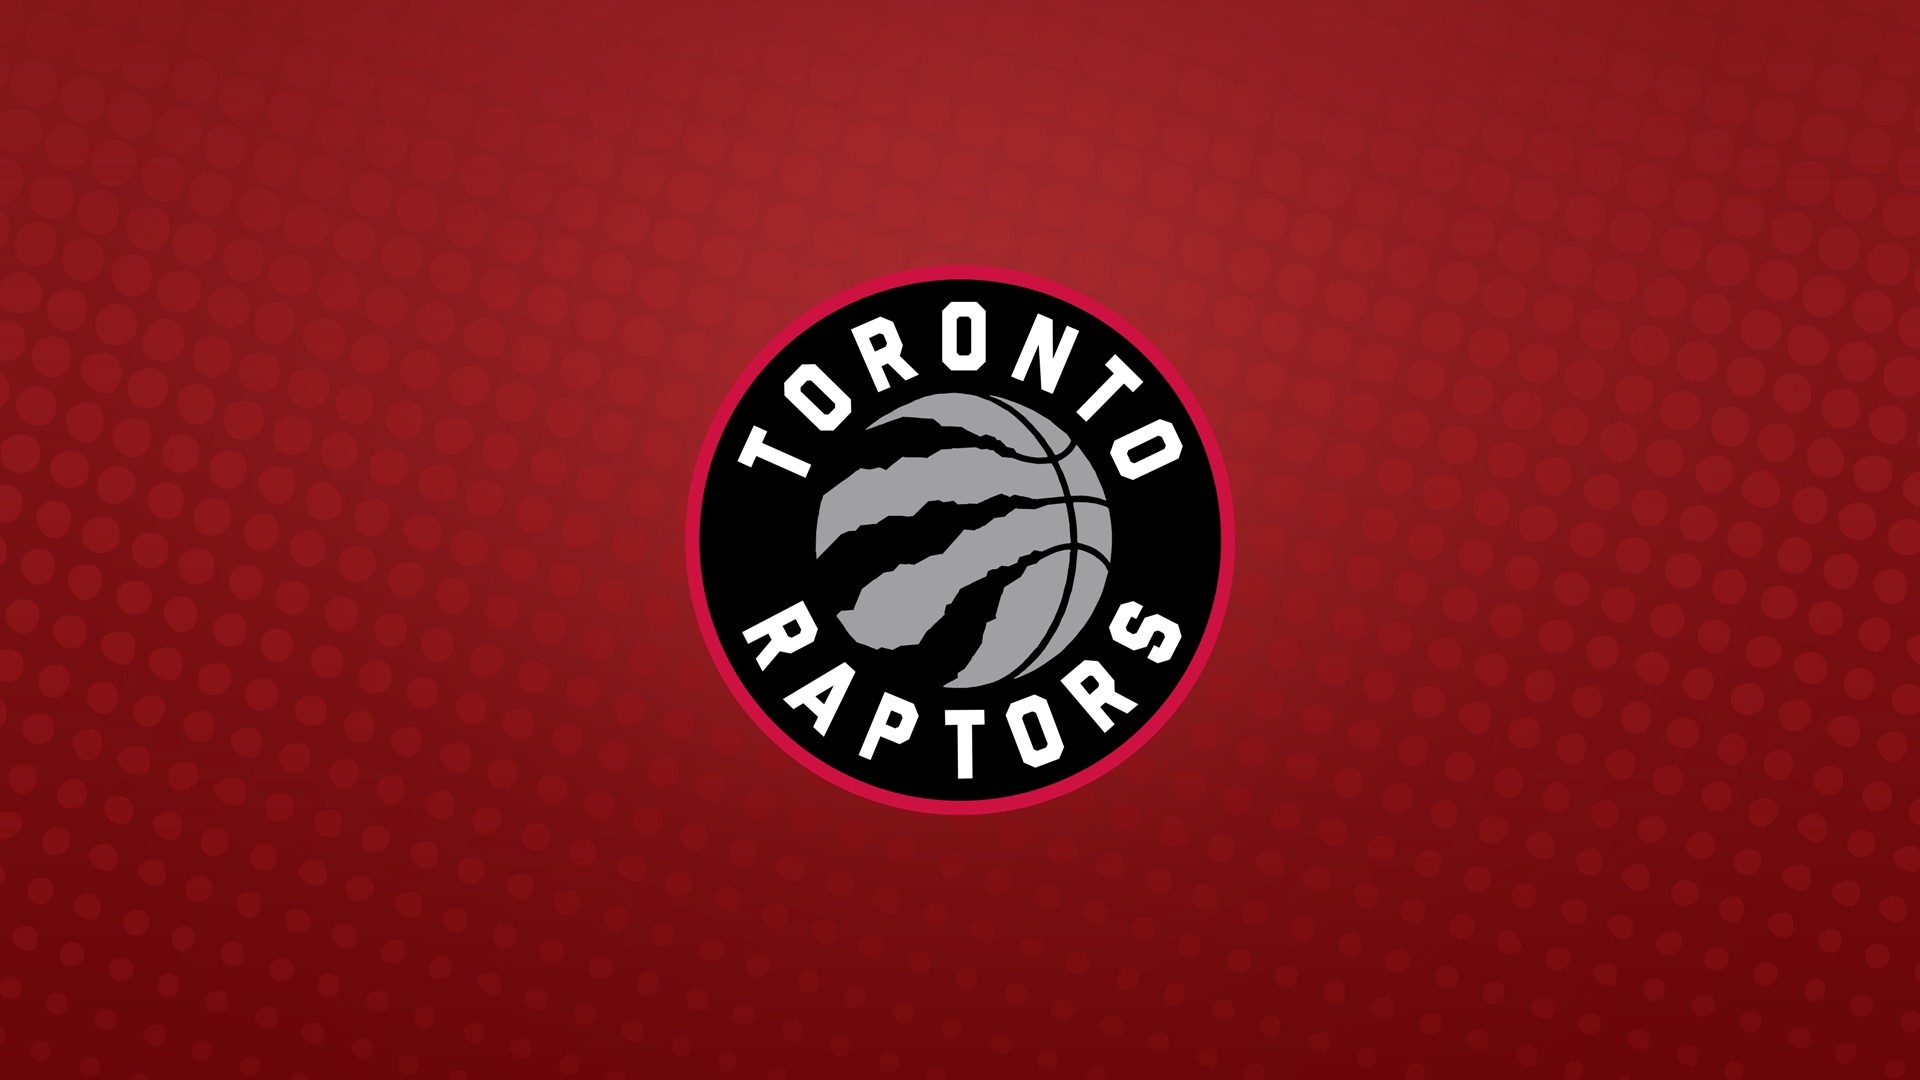 Raptors Basketball Wallpaper For Mac Backgrounds with image dimensions 1920x1080 pixel. You can make this wallpaper for your Desktop Computer Backgrounds, Windows or Mac Screensavers, iPhone Lock screen, Tablet or Android and another Mobile Phone device